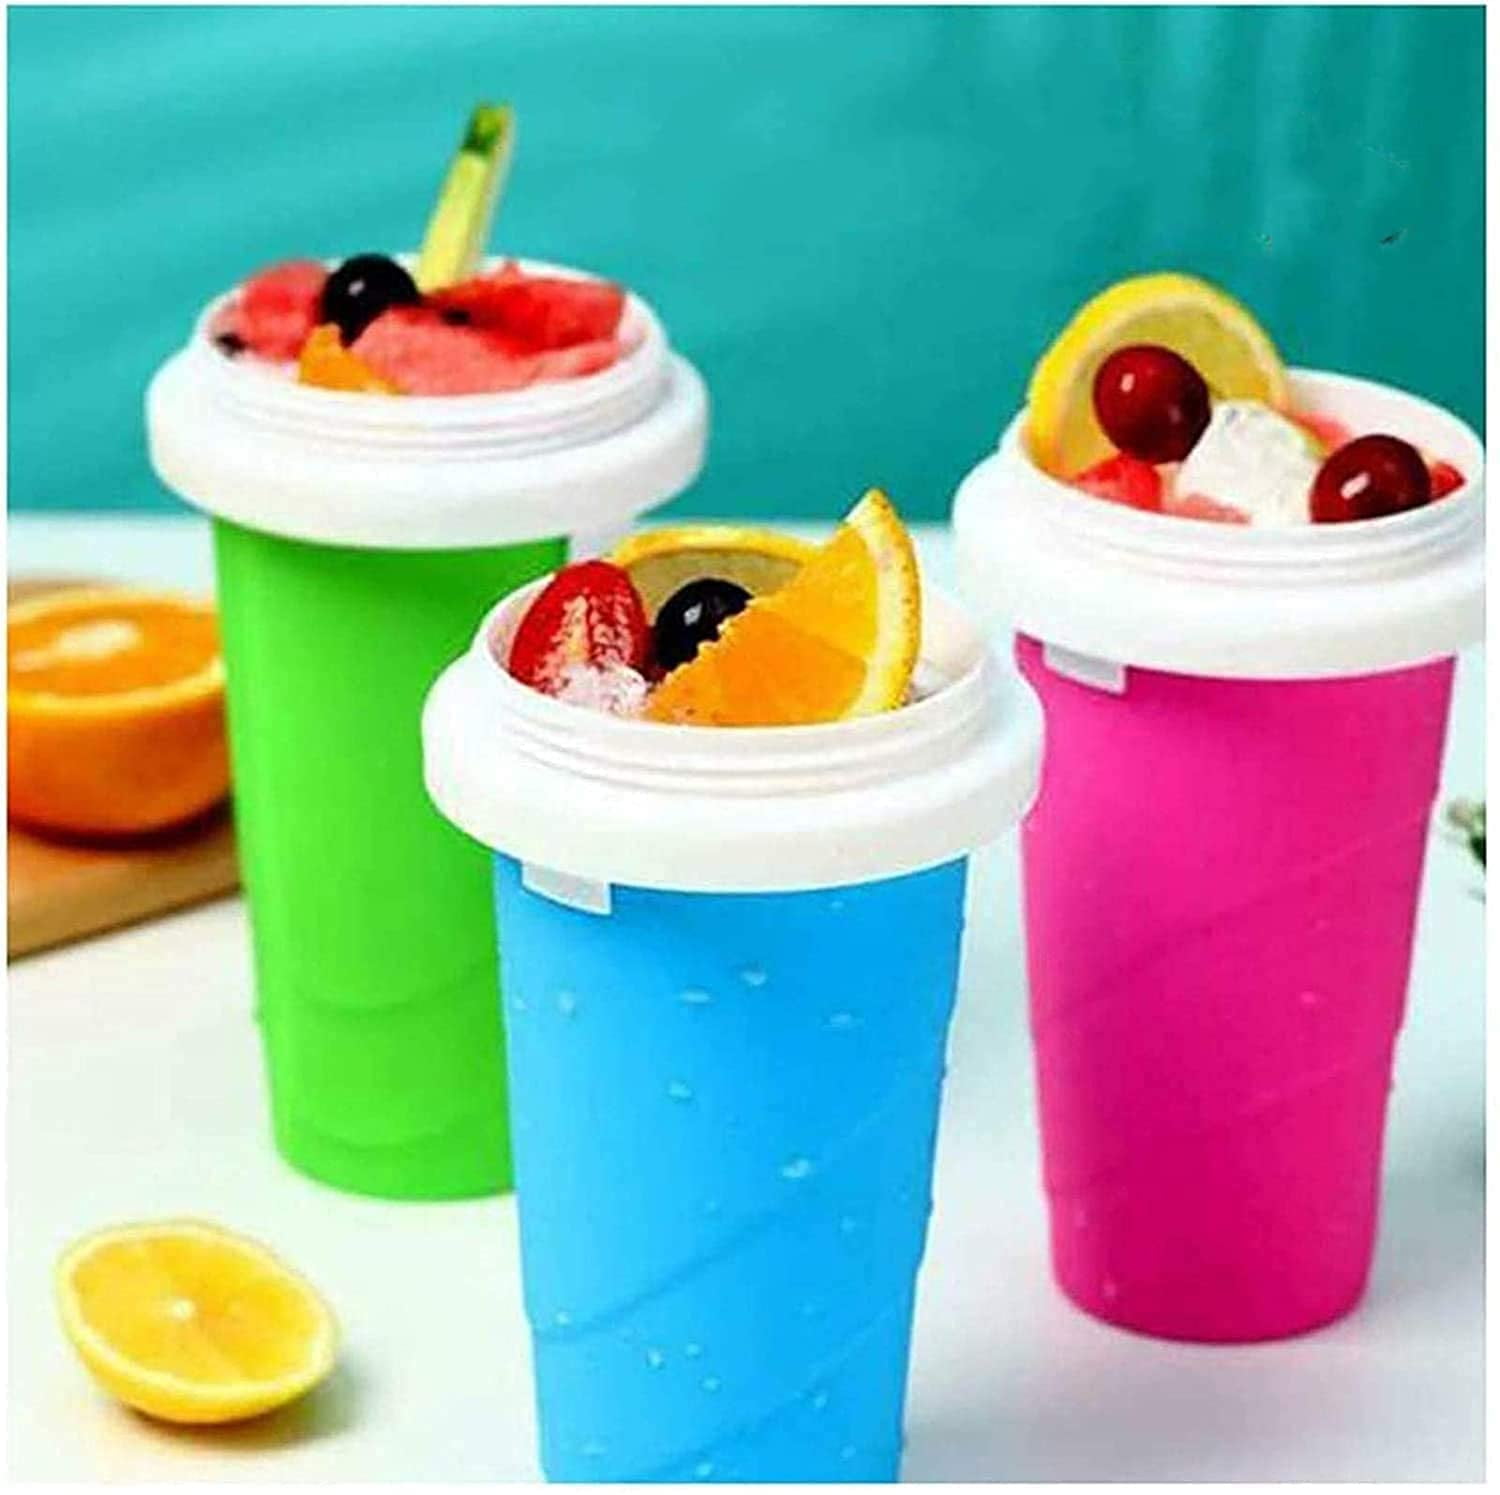 Schnellgefrorene Smoothies Robuster Slushy Ice Cream Cup Maker Cooling T4G6 